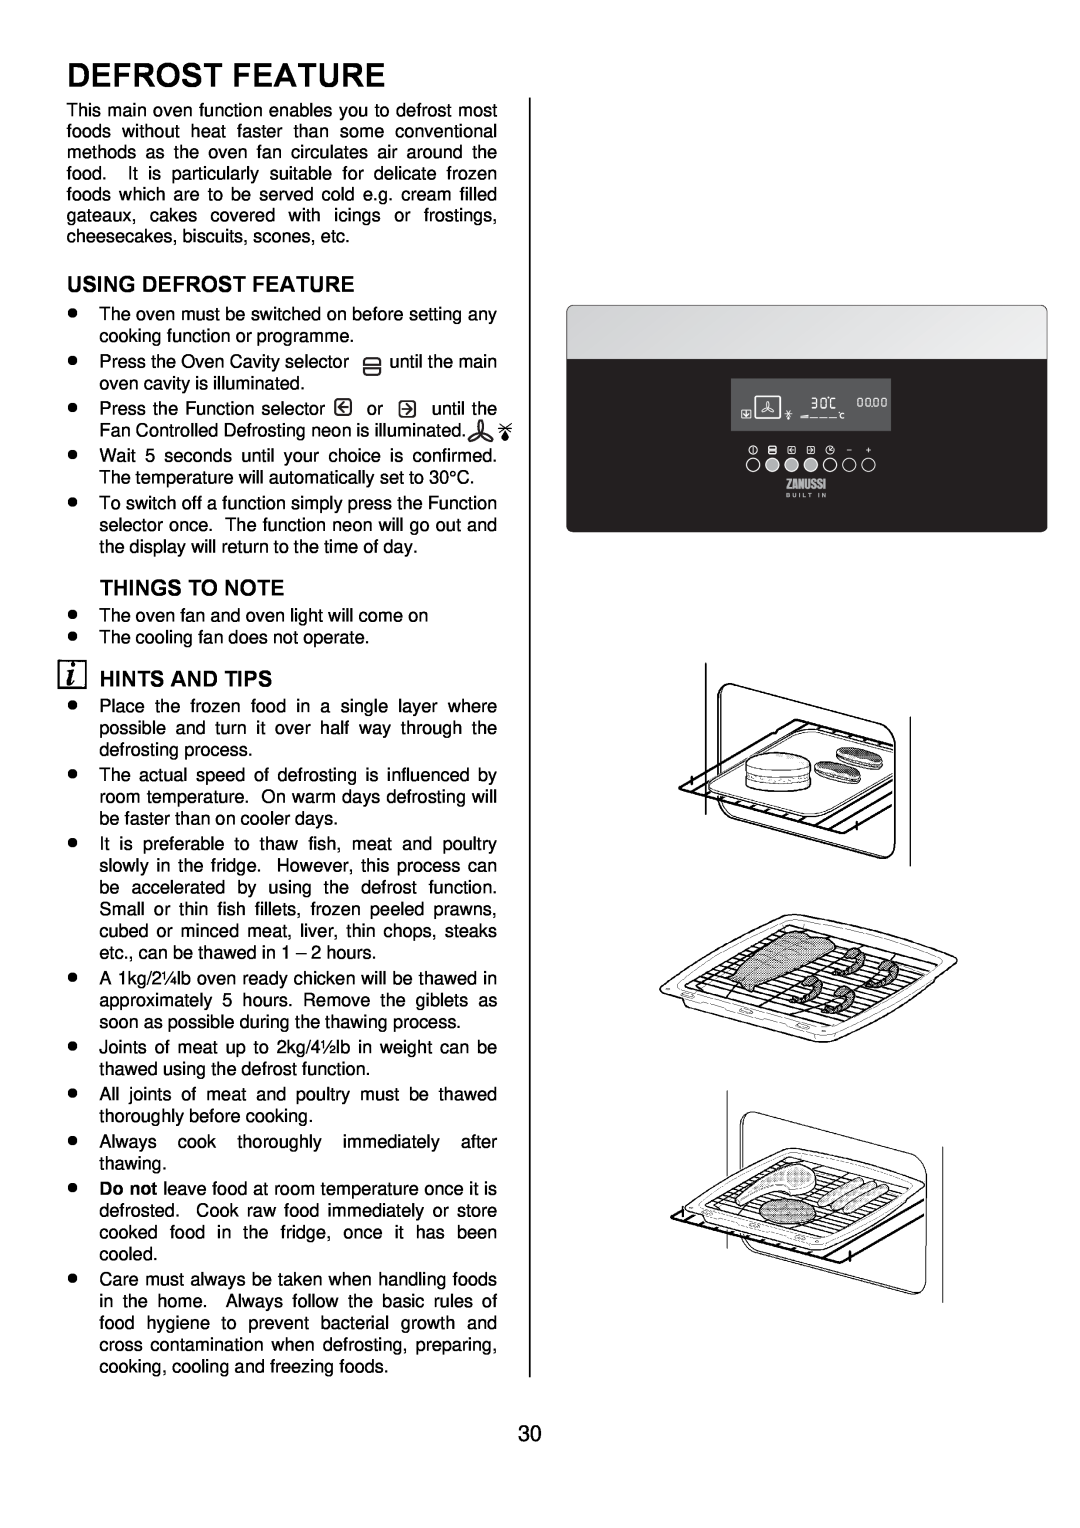 Zanussi ZDQ 995 manual Using Defrost Feature, Things To Note, Hints And Tips 